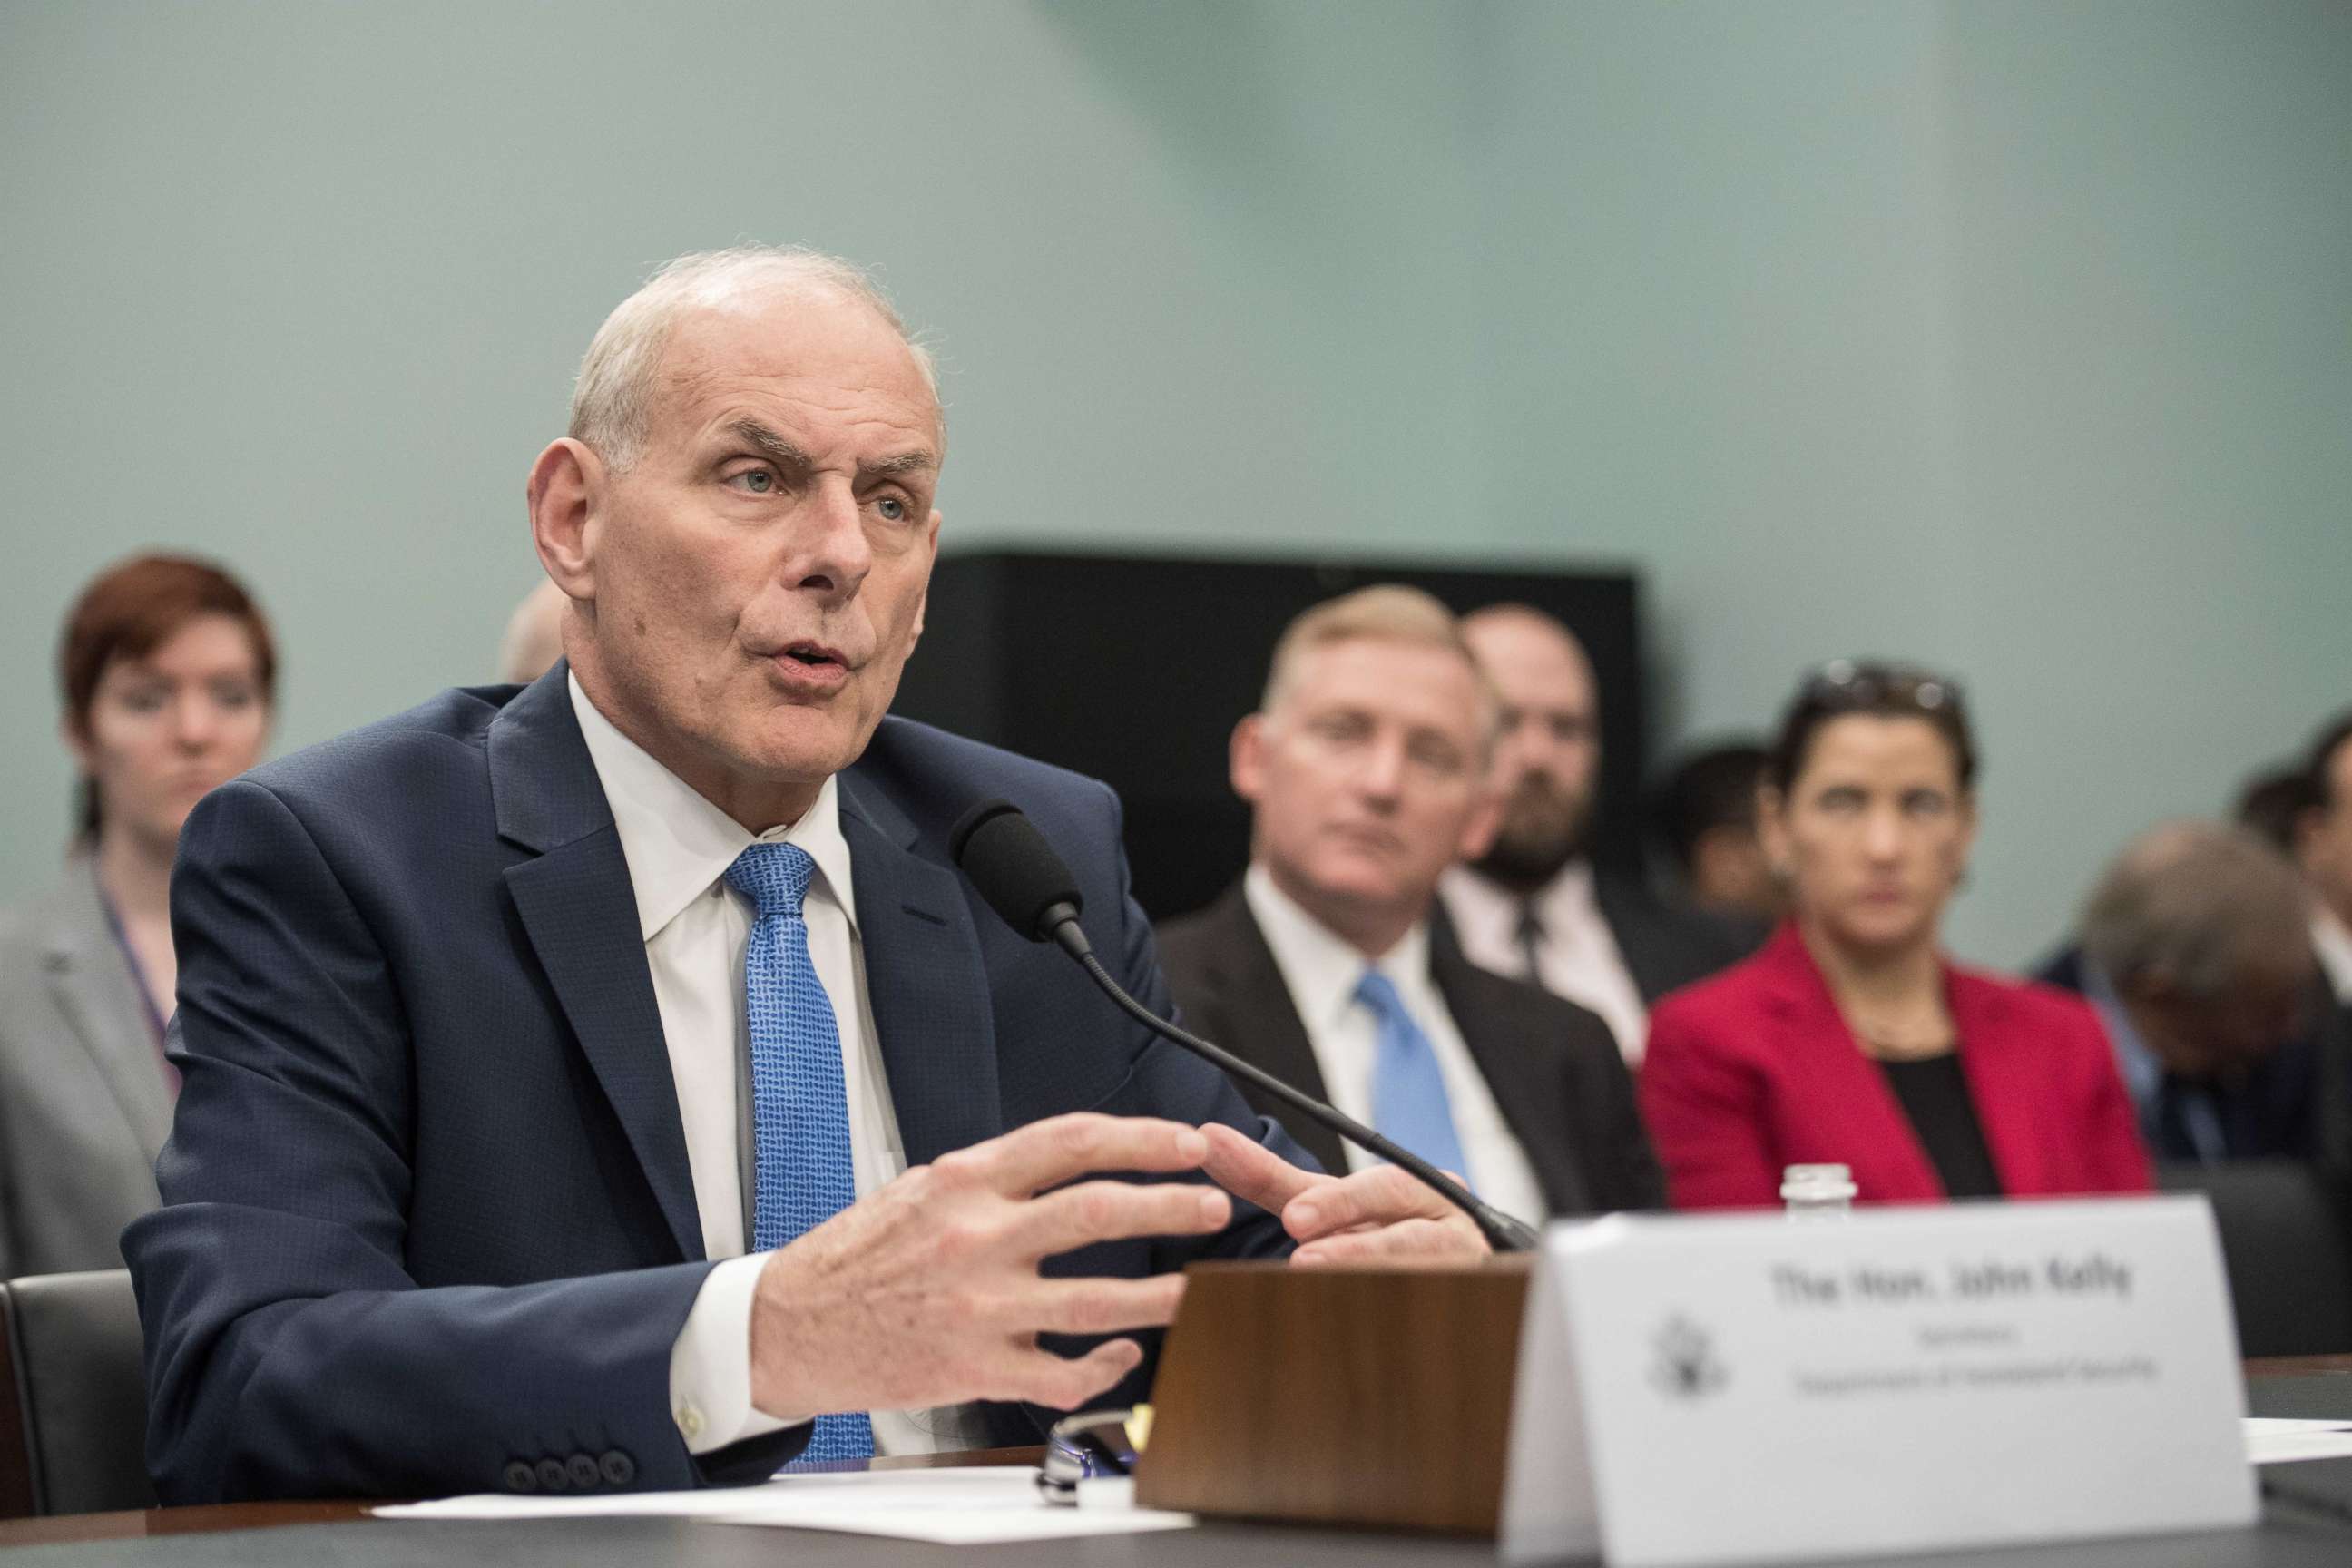 PHOTO: John Kelly testifies at a House Appropriations Committee Homeland Security Subcommittee hearing on "The Department of Homeland Security Fiscal Year 18 Budget Request" on Capitol Hill, May 24, 2017.